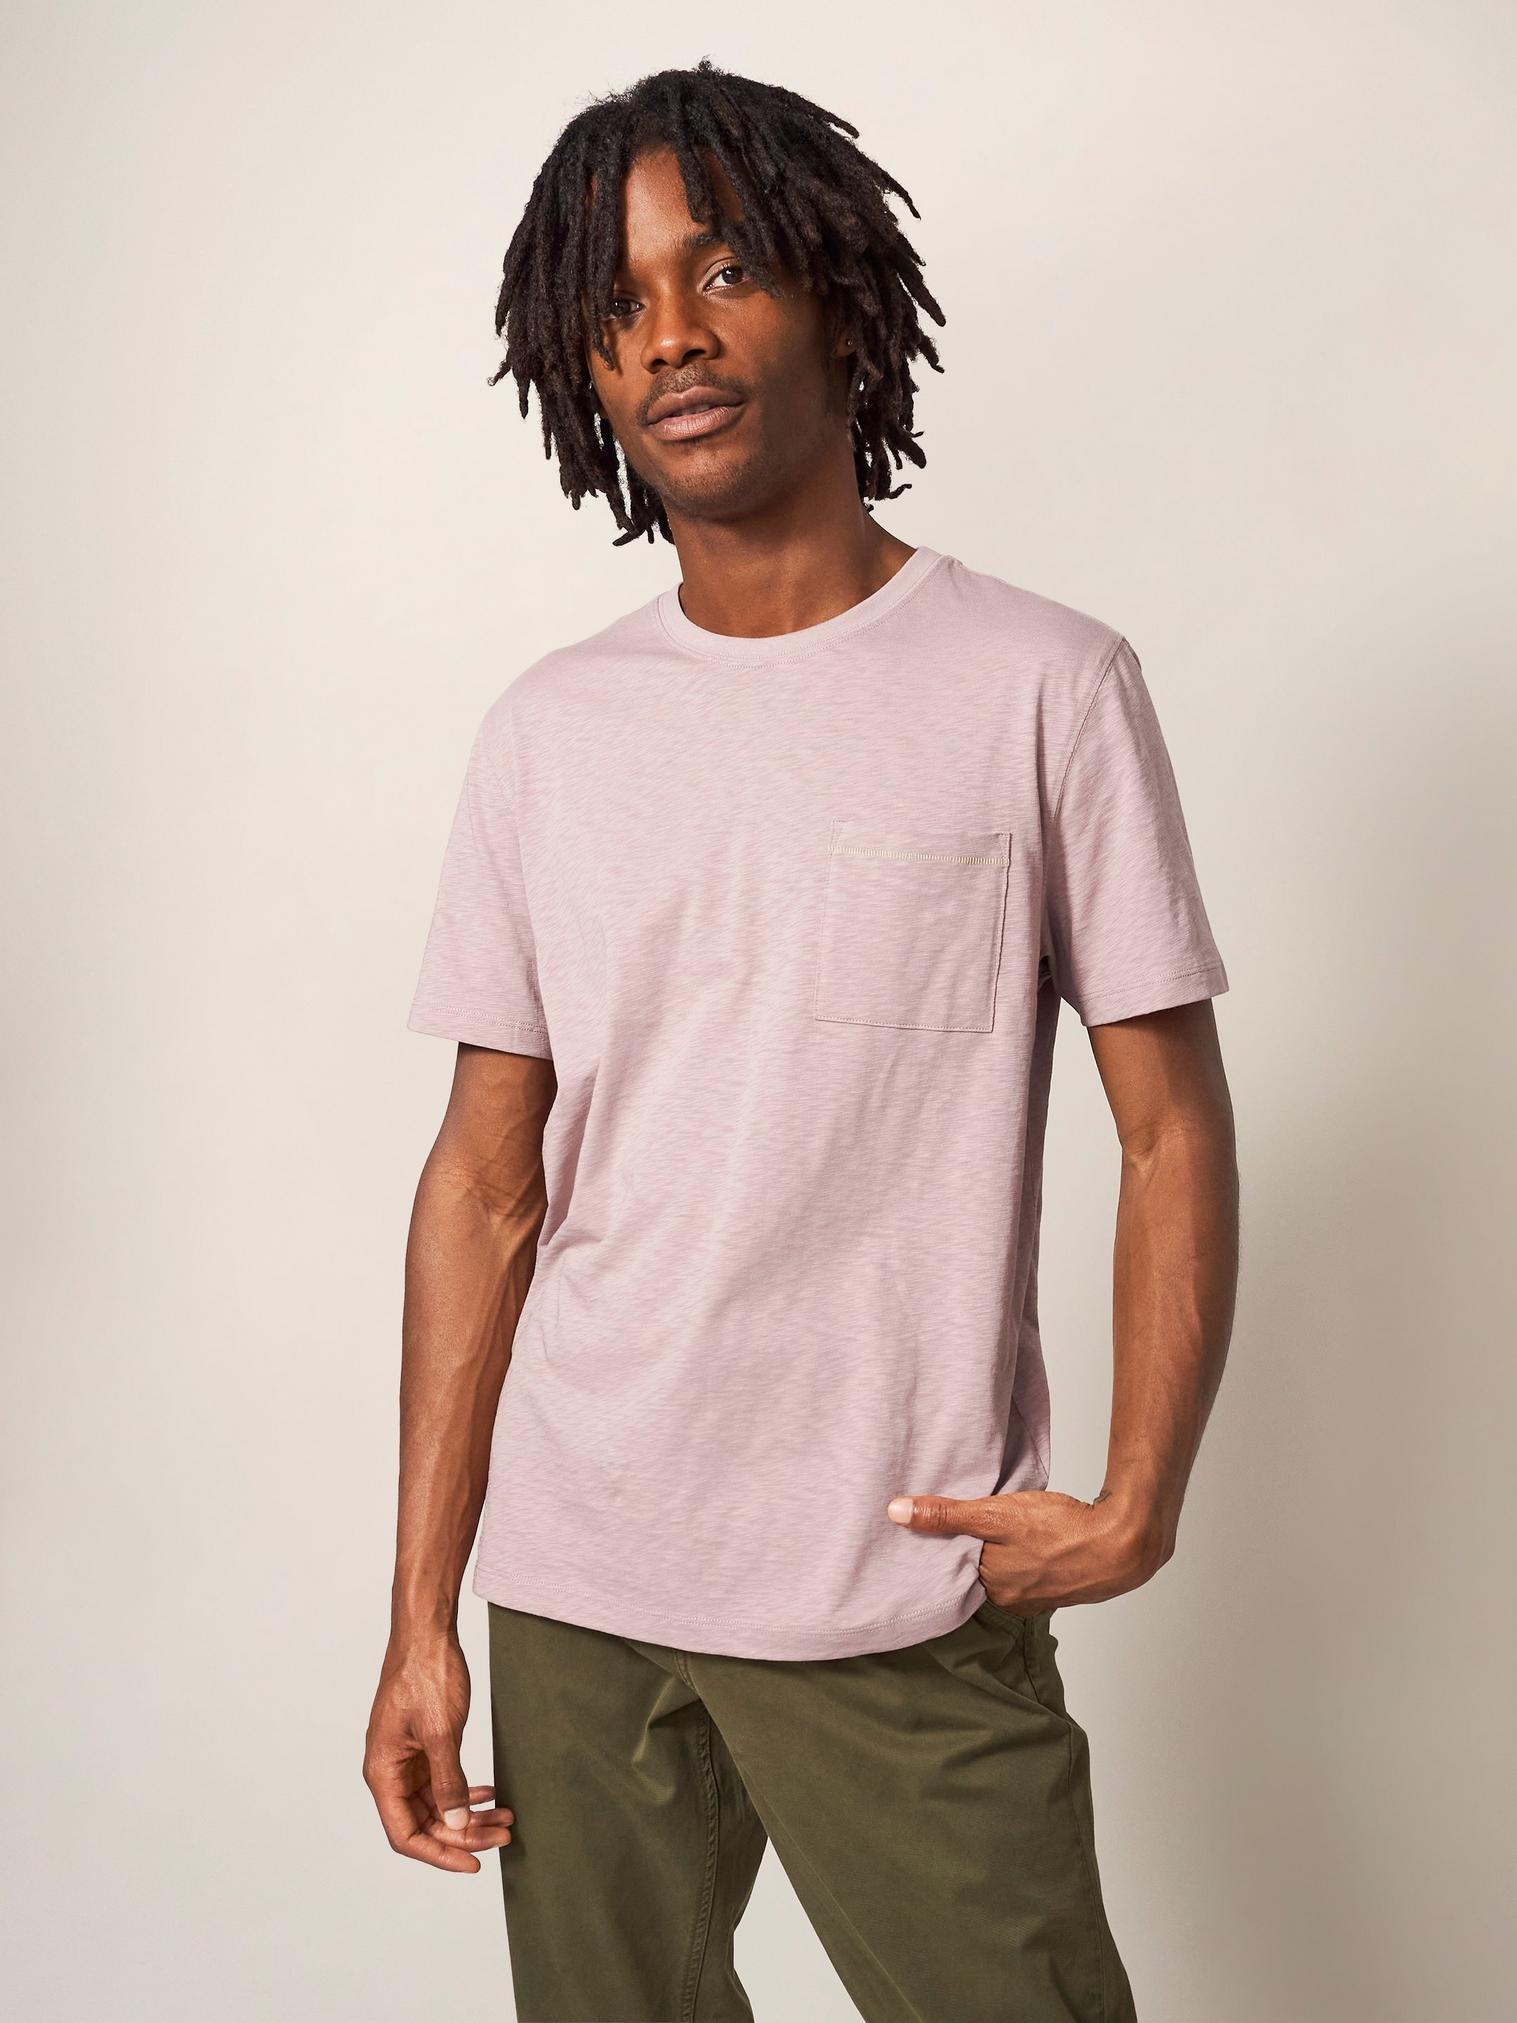 West Coast Graphic Tee in DUS PINK - LIFESTYLE